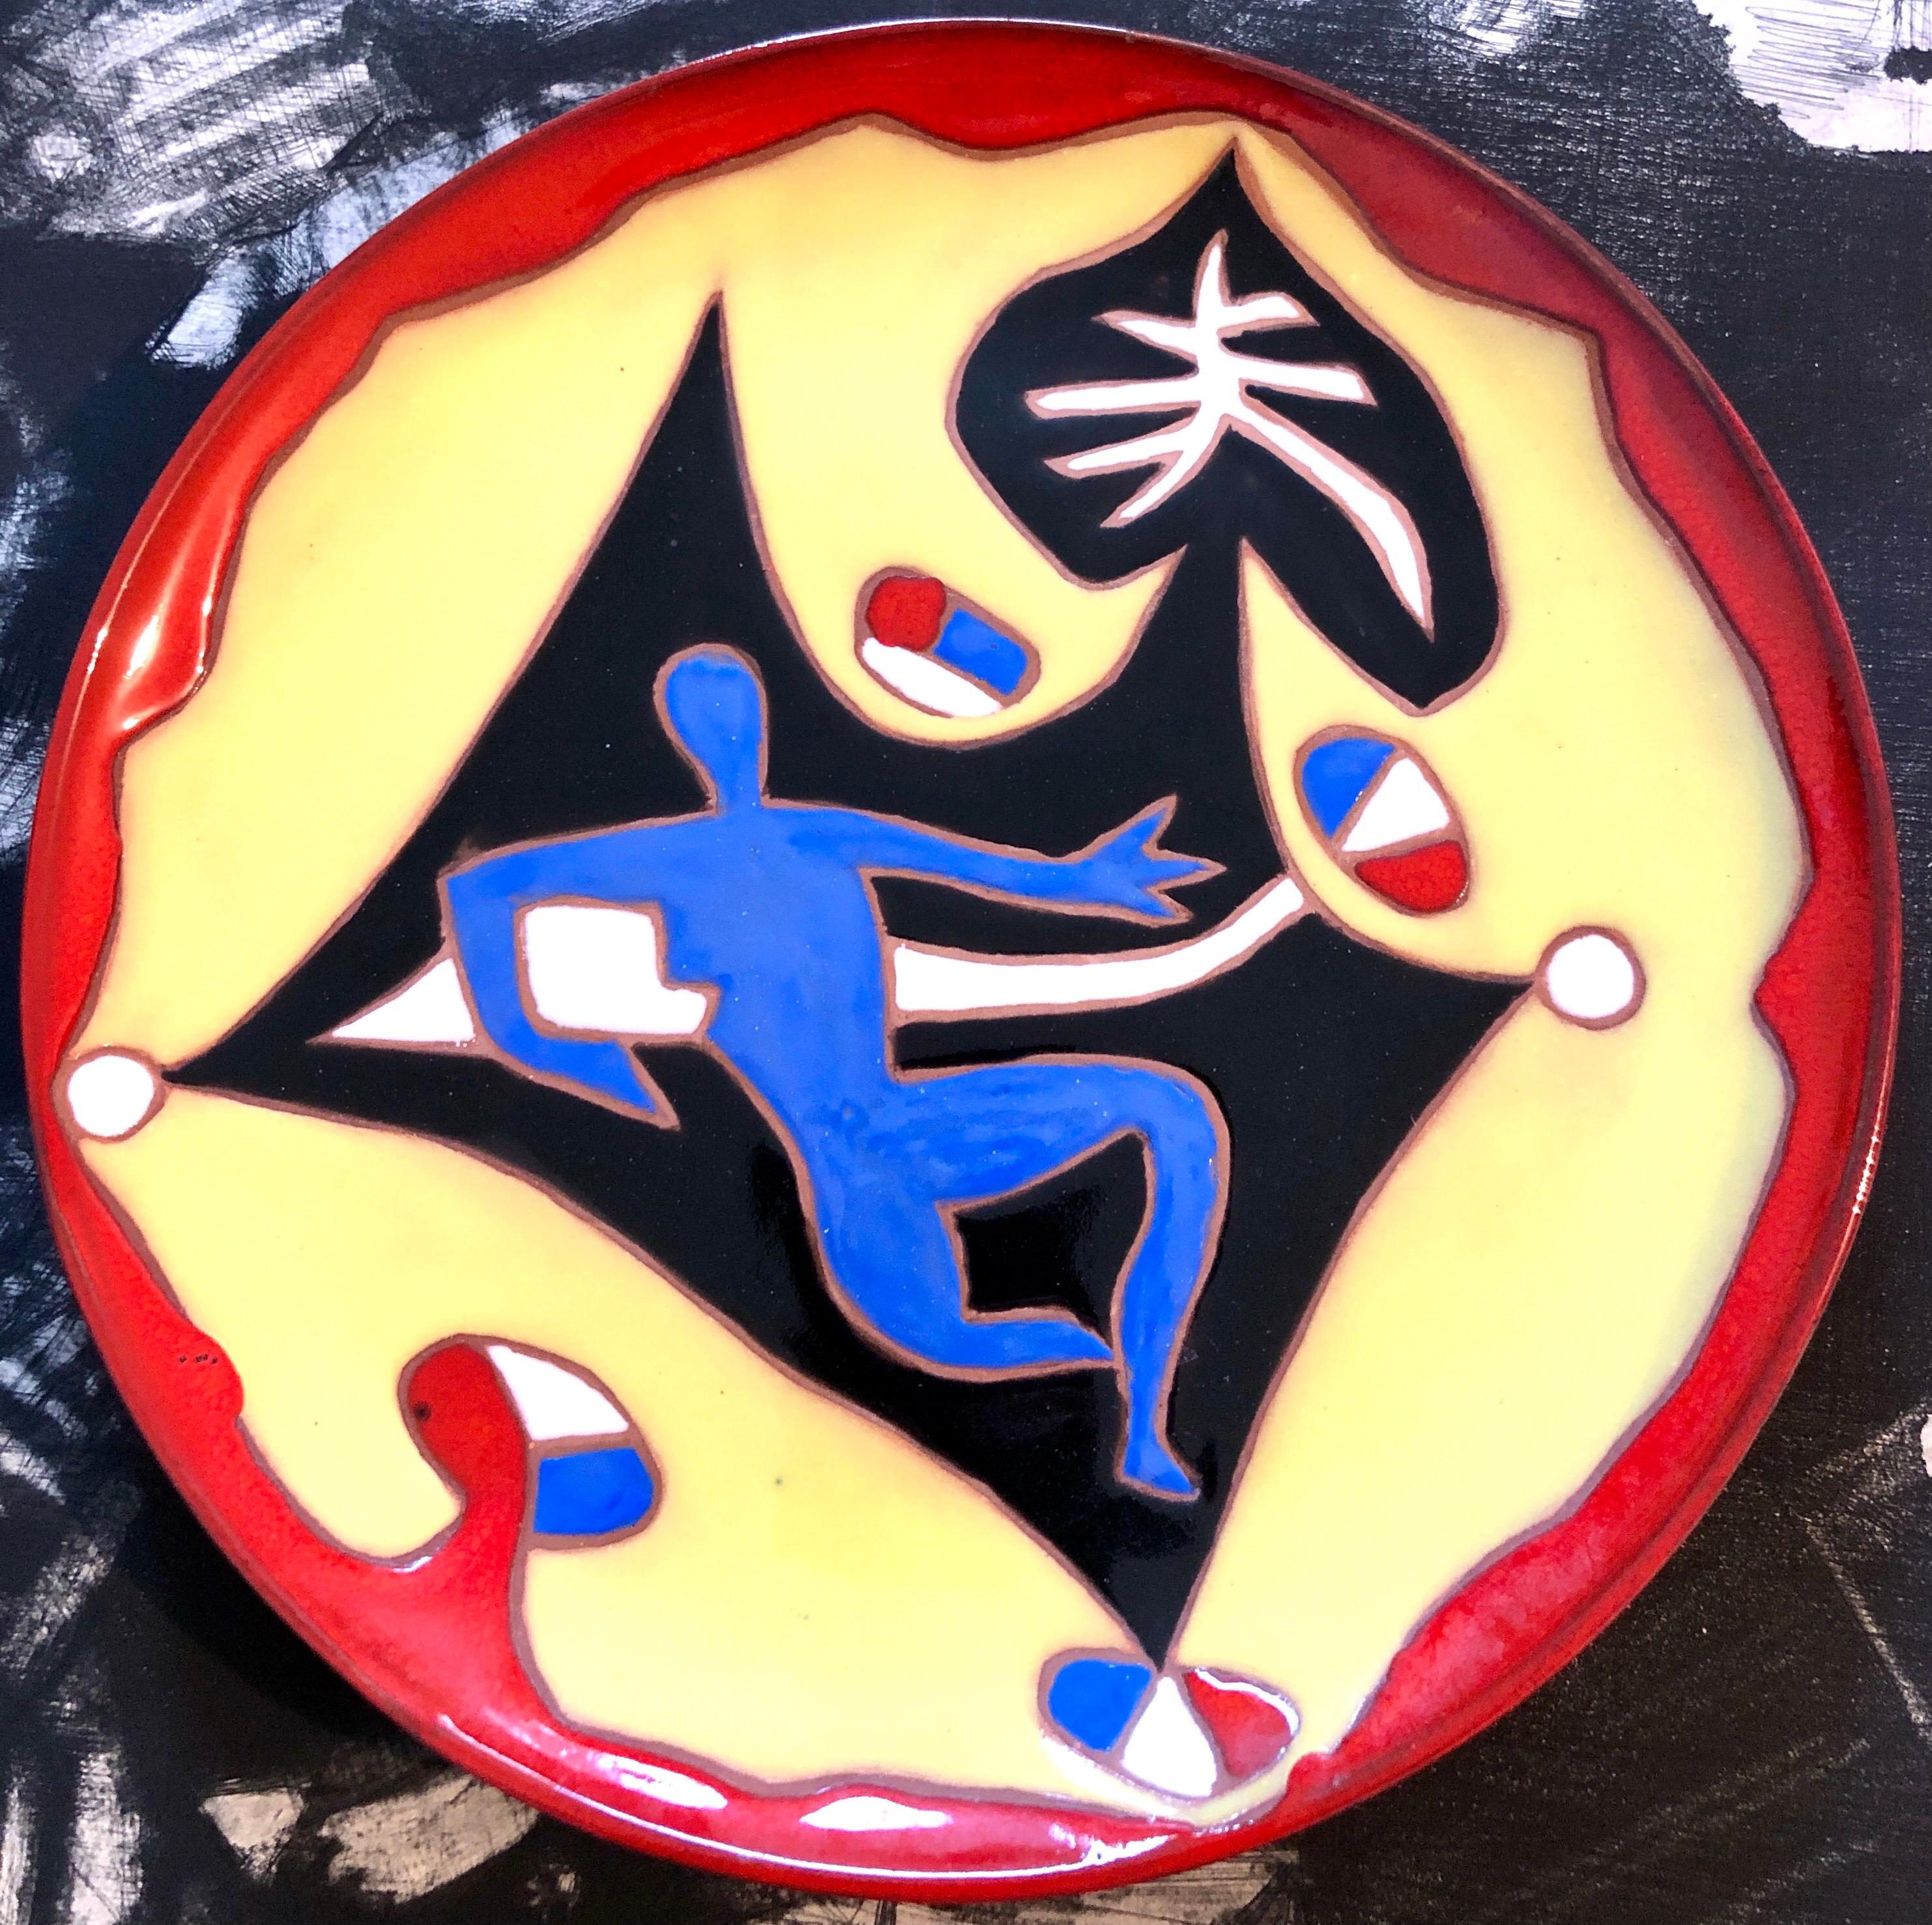 Vintage Jean Lurcat glazed fired enamel wall plaque ceramic plate limited edition hand inscribed faience Ceramique Saint Vicens charger.  It depicts a highly stylized figure in bright, vibrant colors. Beach scene with swimmer and French Flags